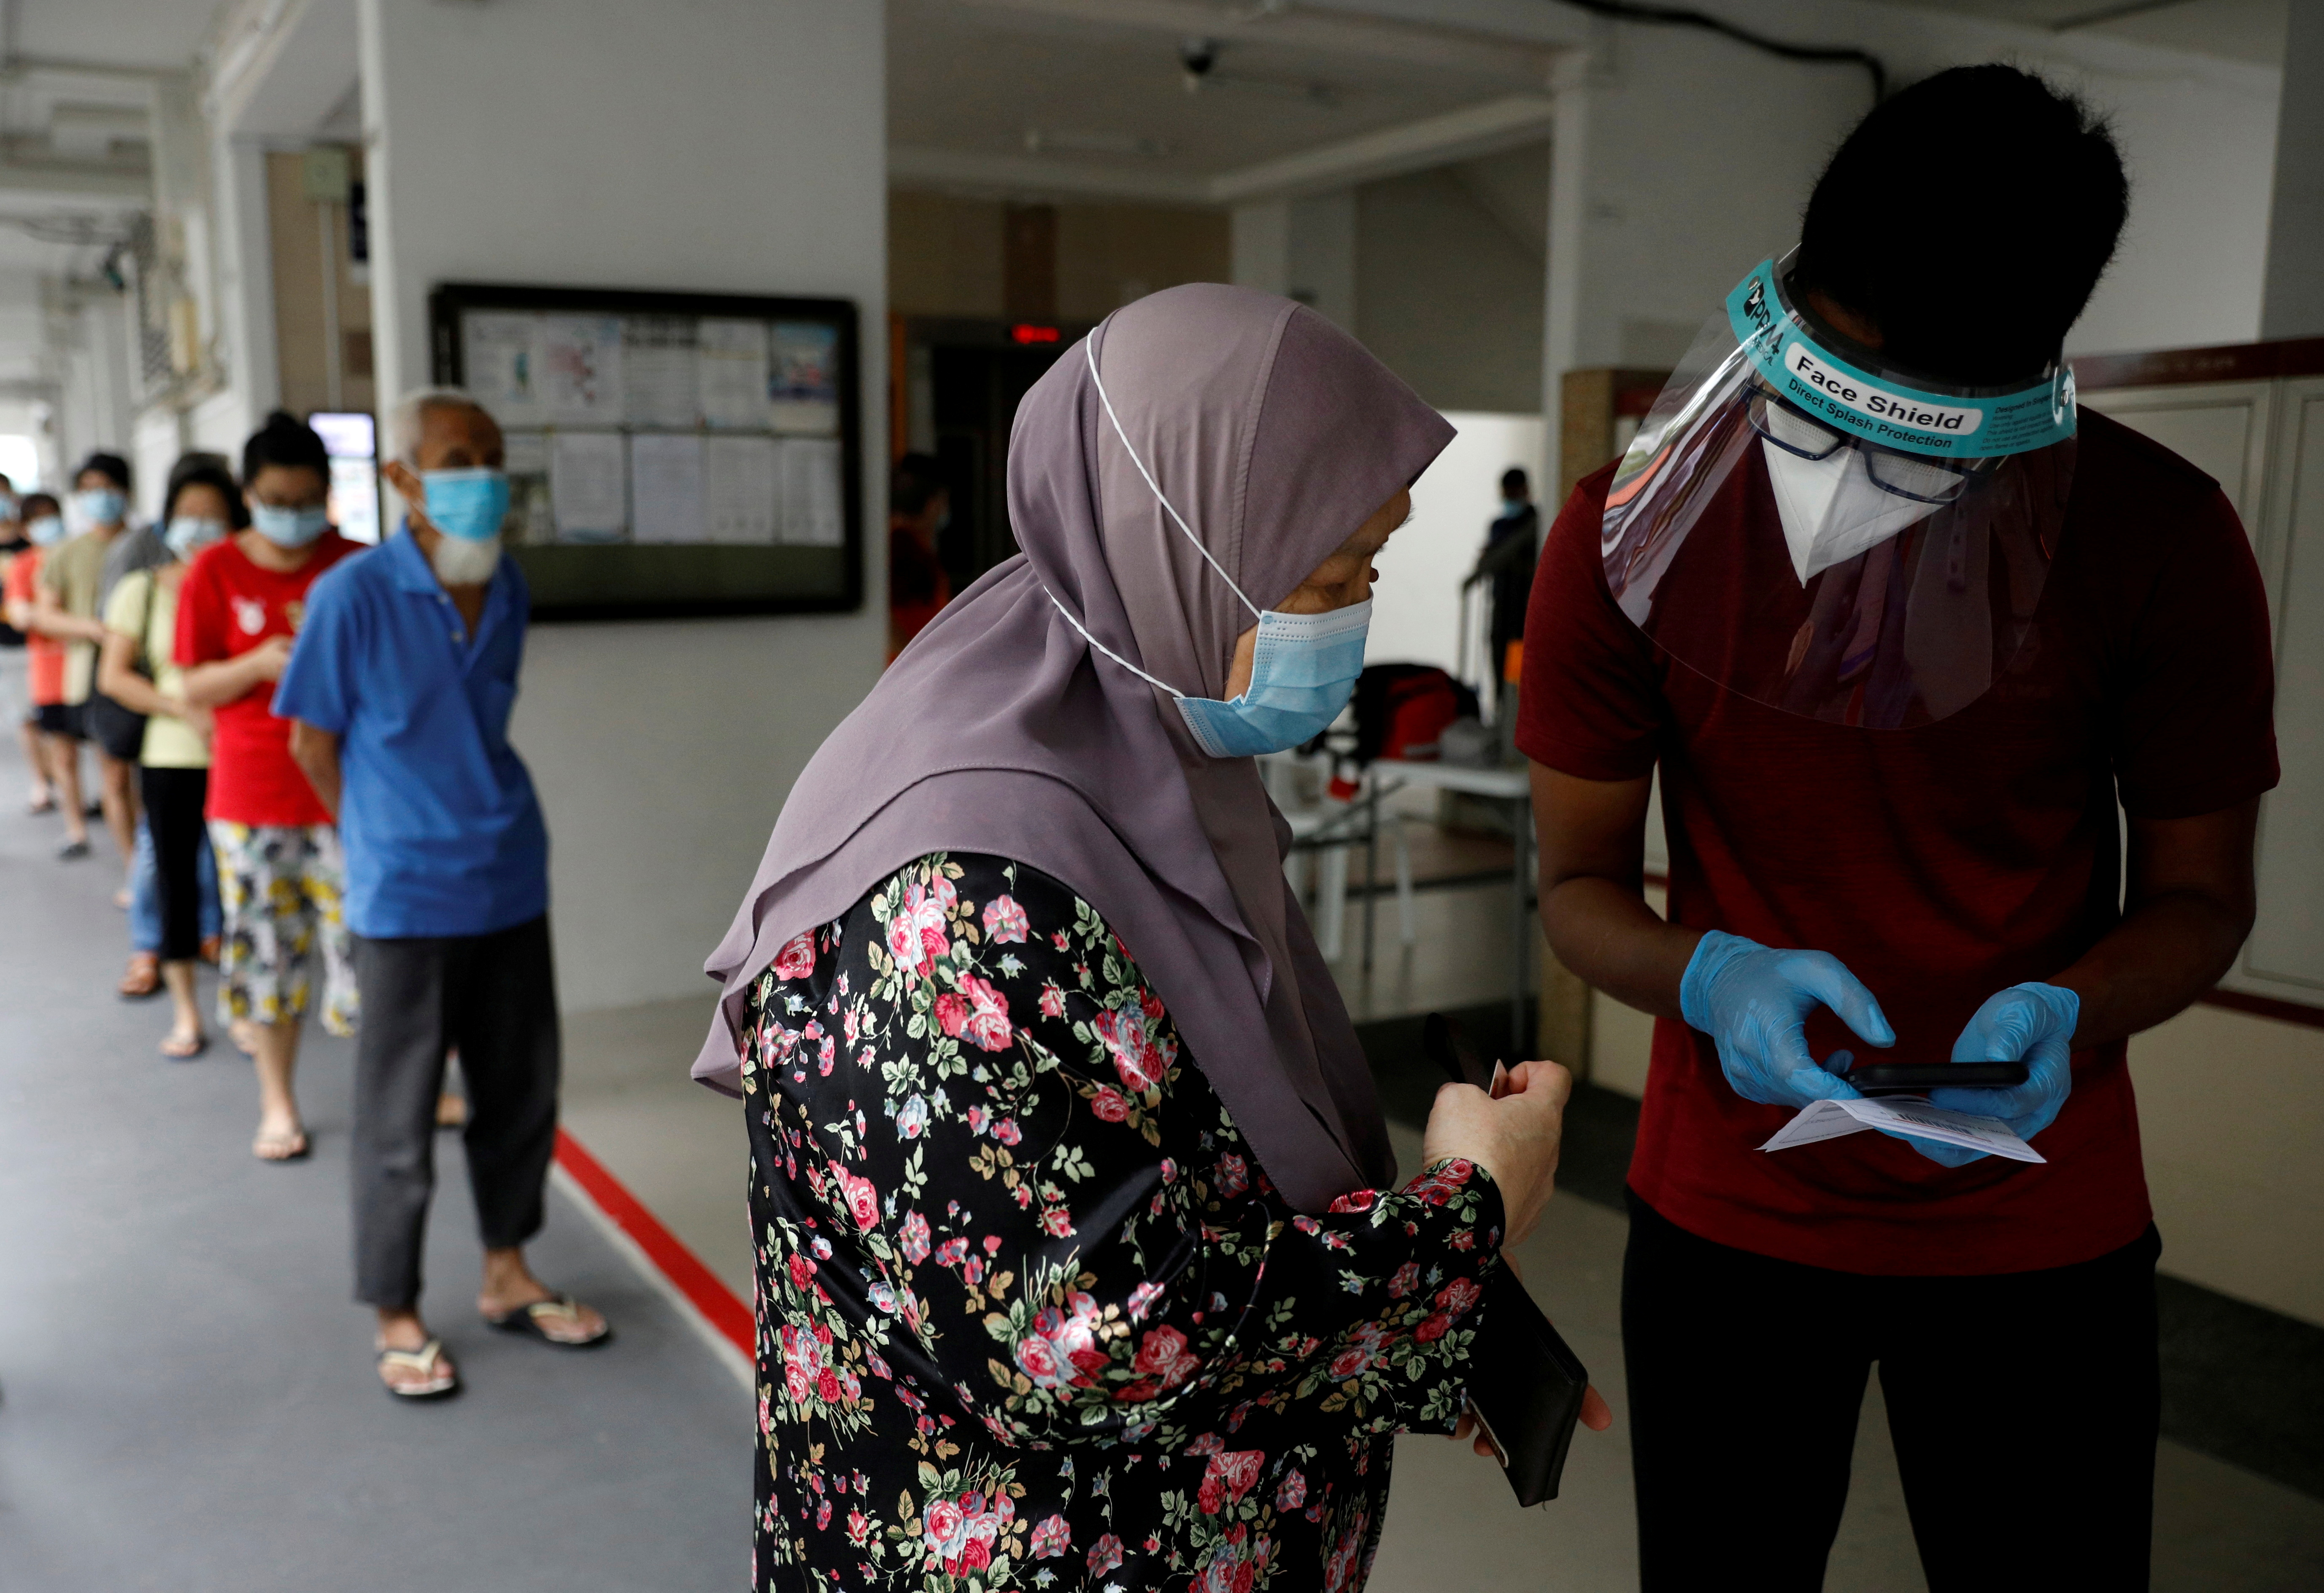 Residents of a public housing estate queue up for their mandatory coronavirus disease (COVID-19) swab tests after some residents were tested positive for the virus, in Singapore